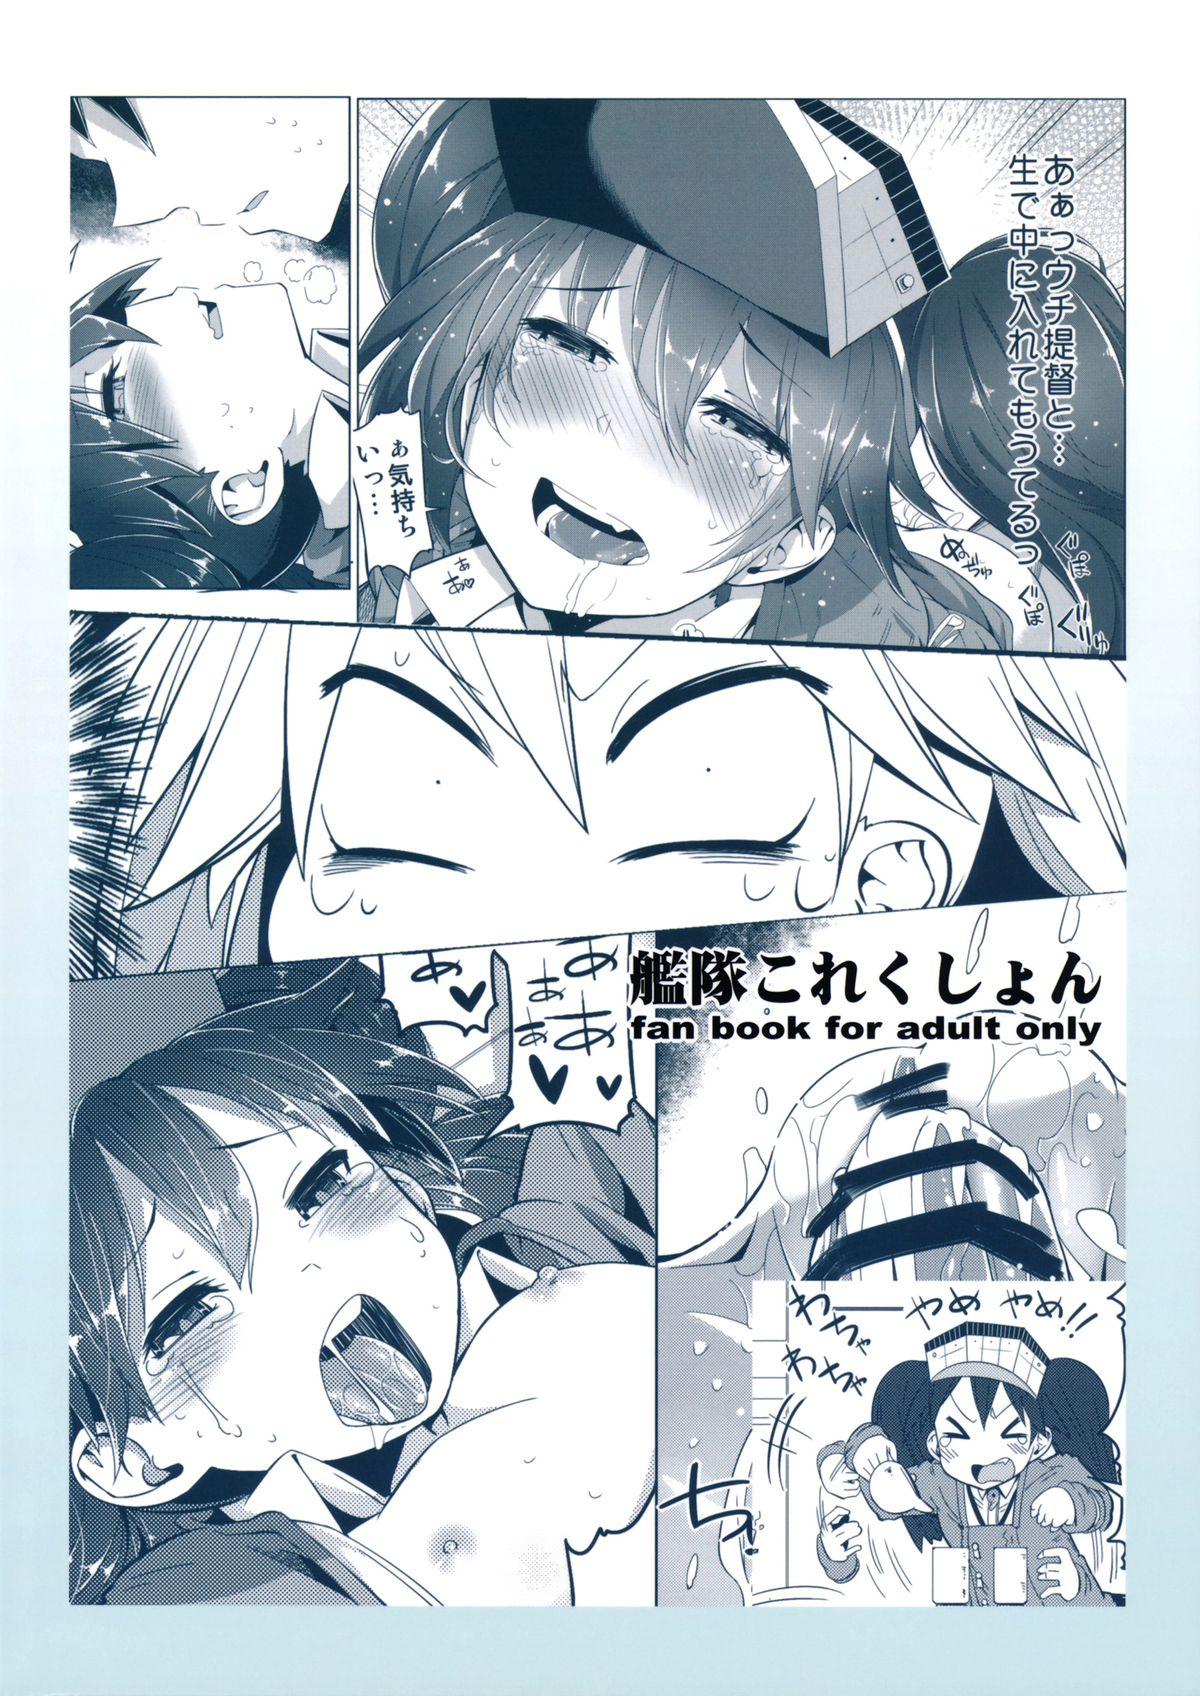 Transvestite Koi suru Otome no Miryoku wa Mune dake janai! | The Allure of a Maiden in Love isn't Only in Her Chest! - Kantai collection Fucking Girls - Page 22